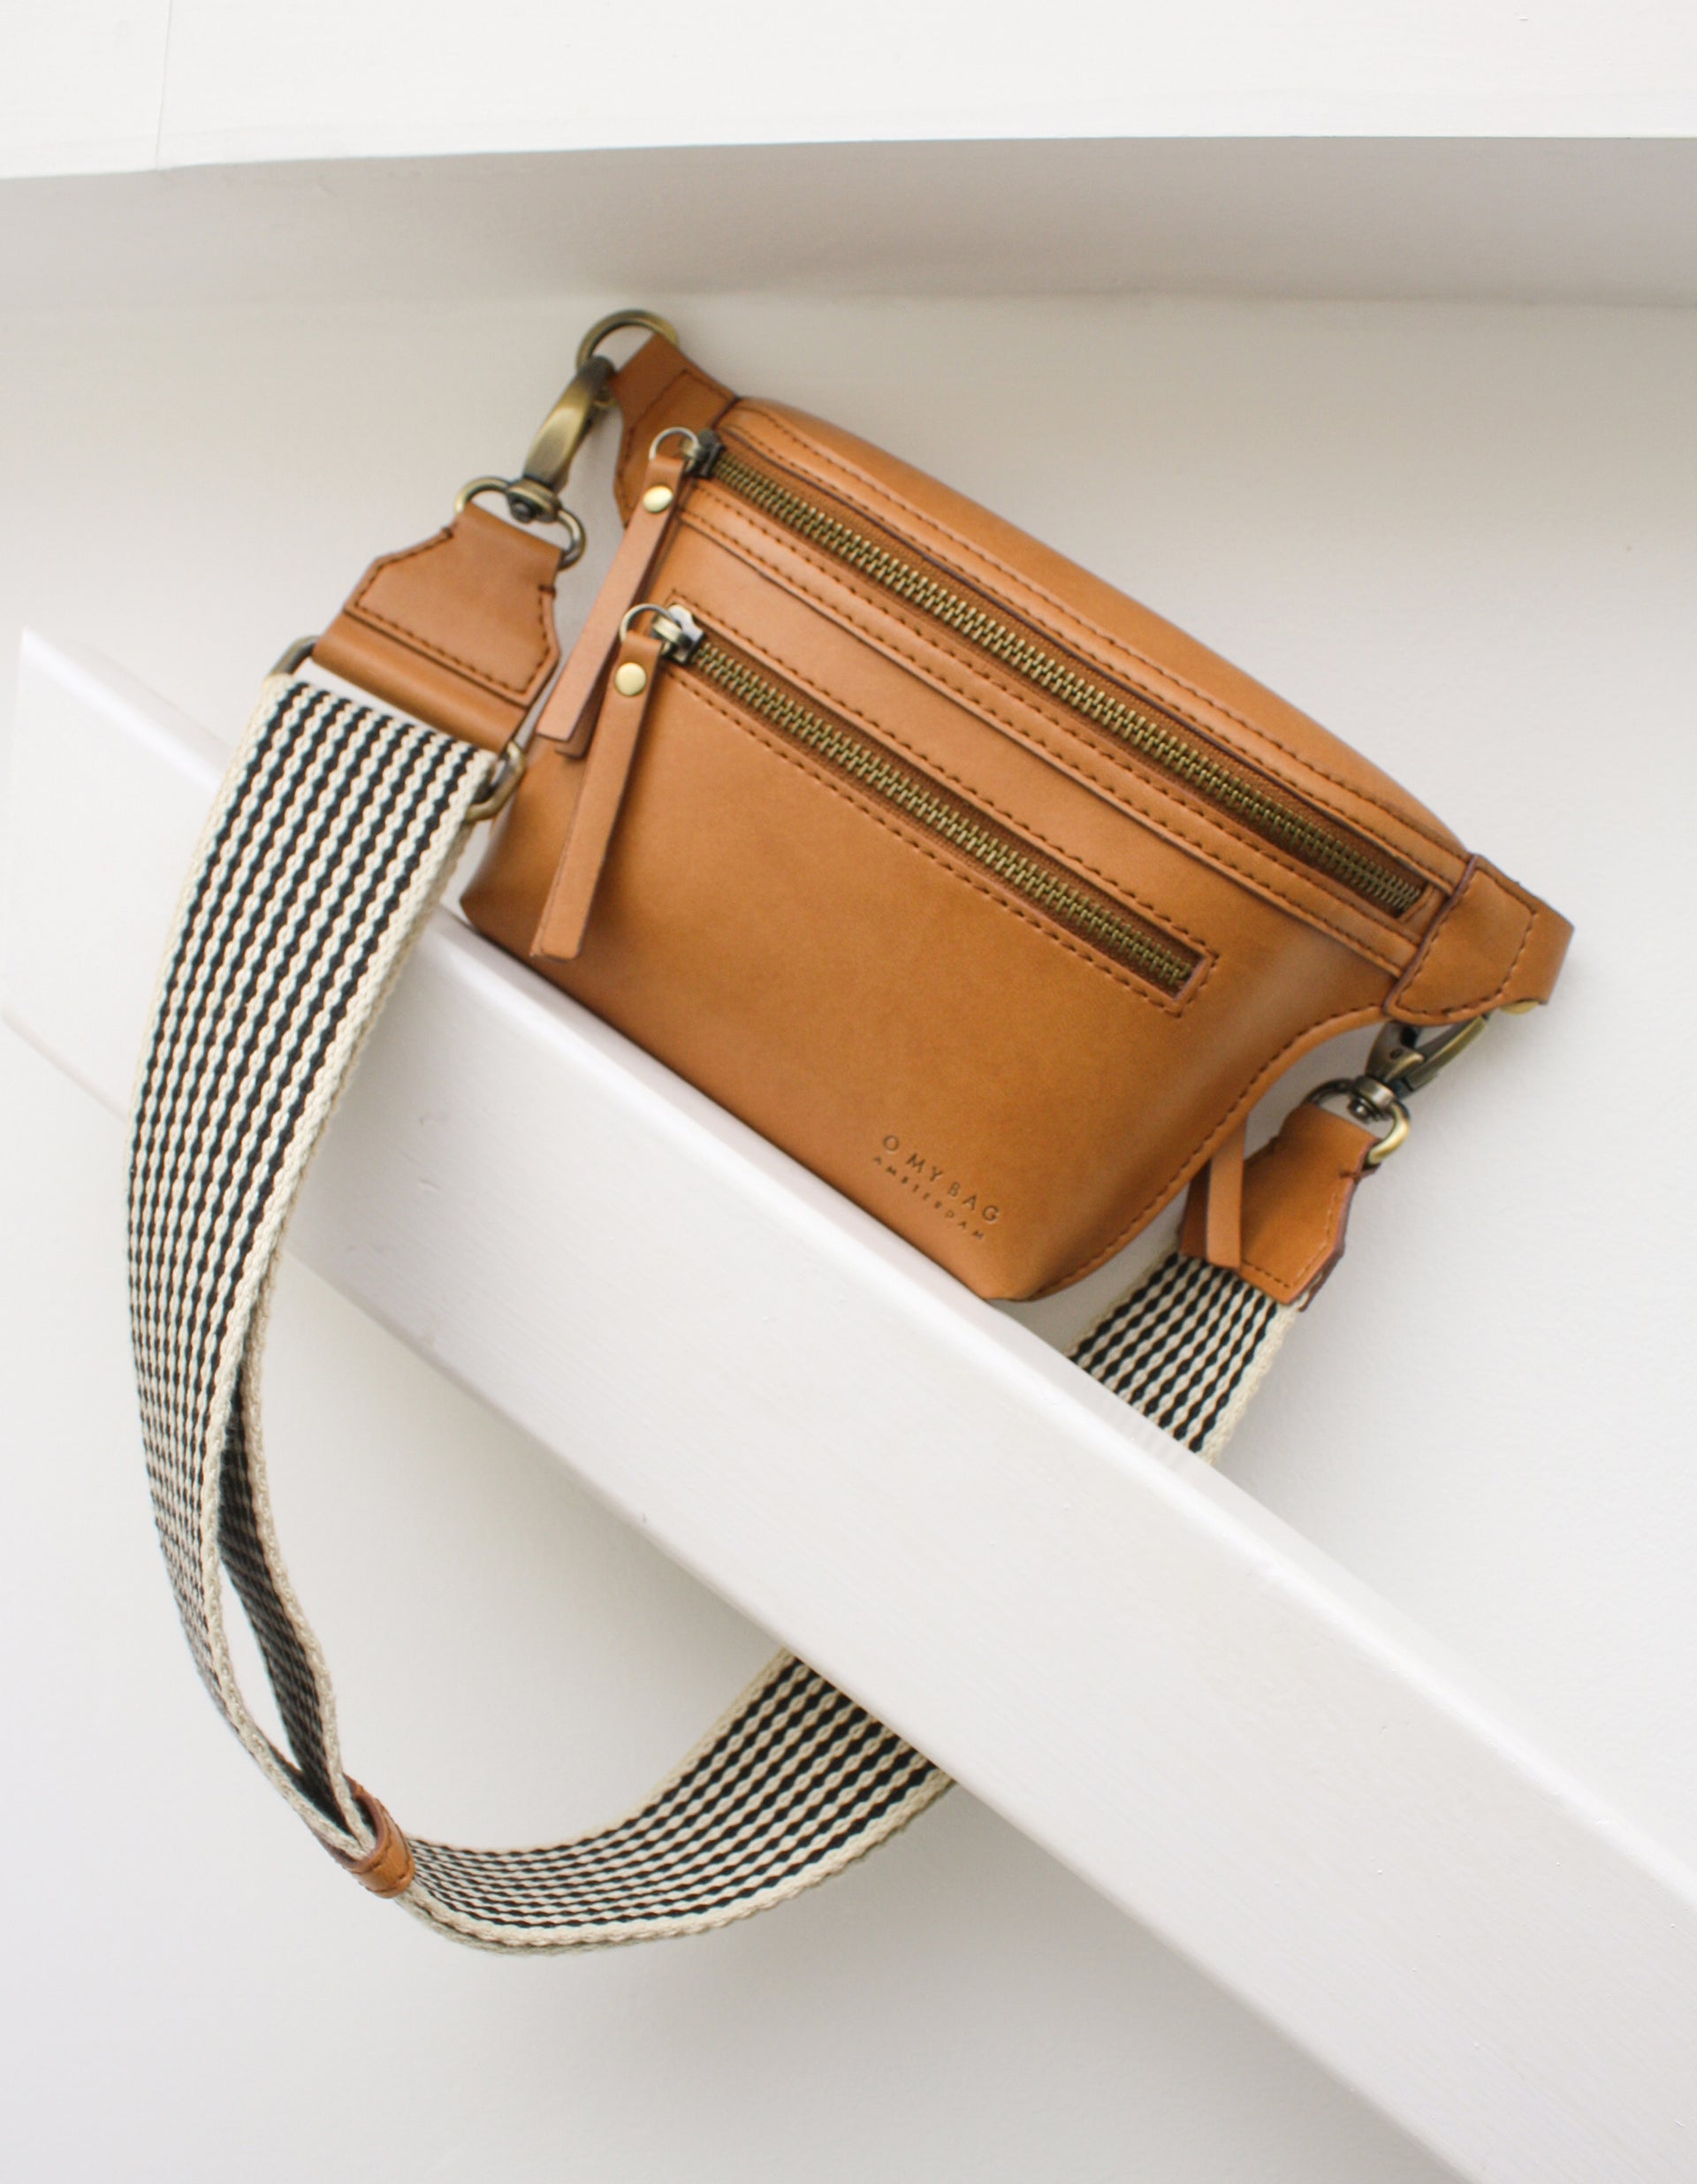 Becks Bum Bag in cognac apple leather - back product shot with checkered webbing strap lifestyle image